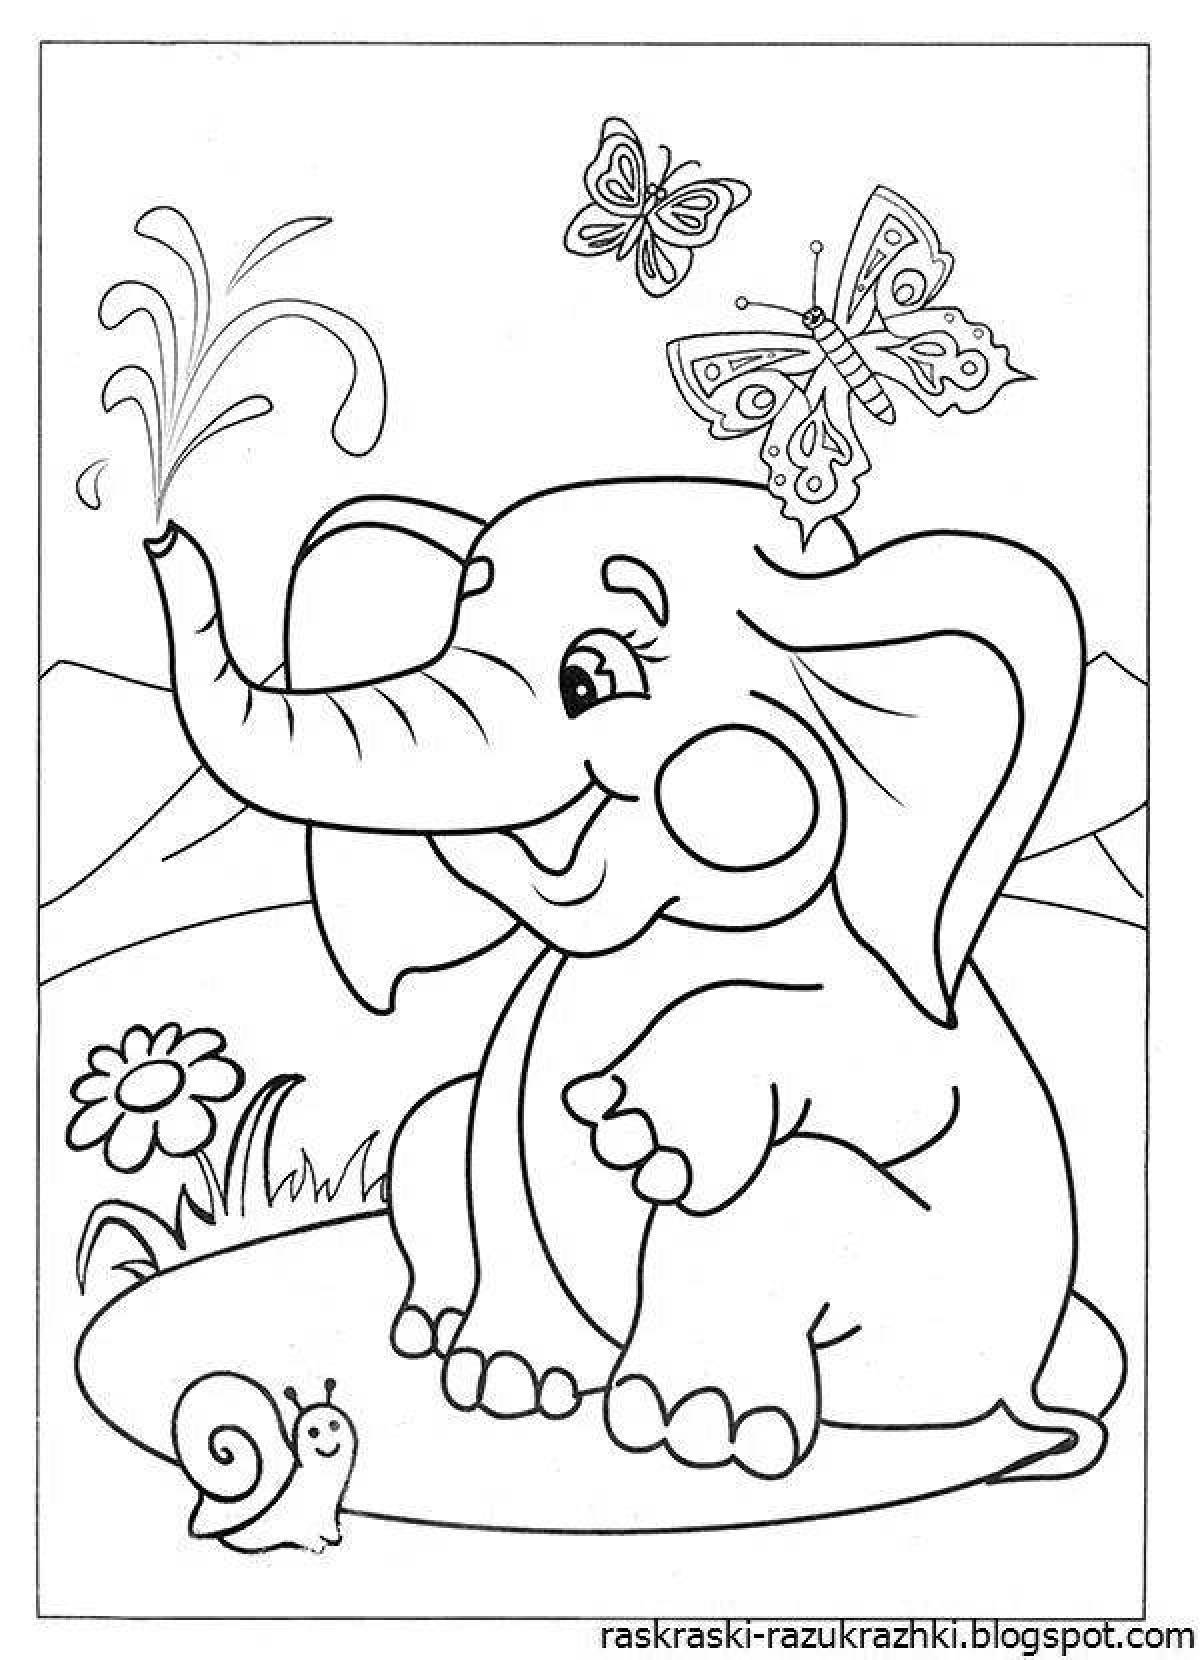 Bright elephant coloring for 7 year olds